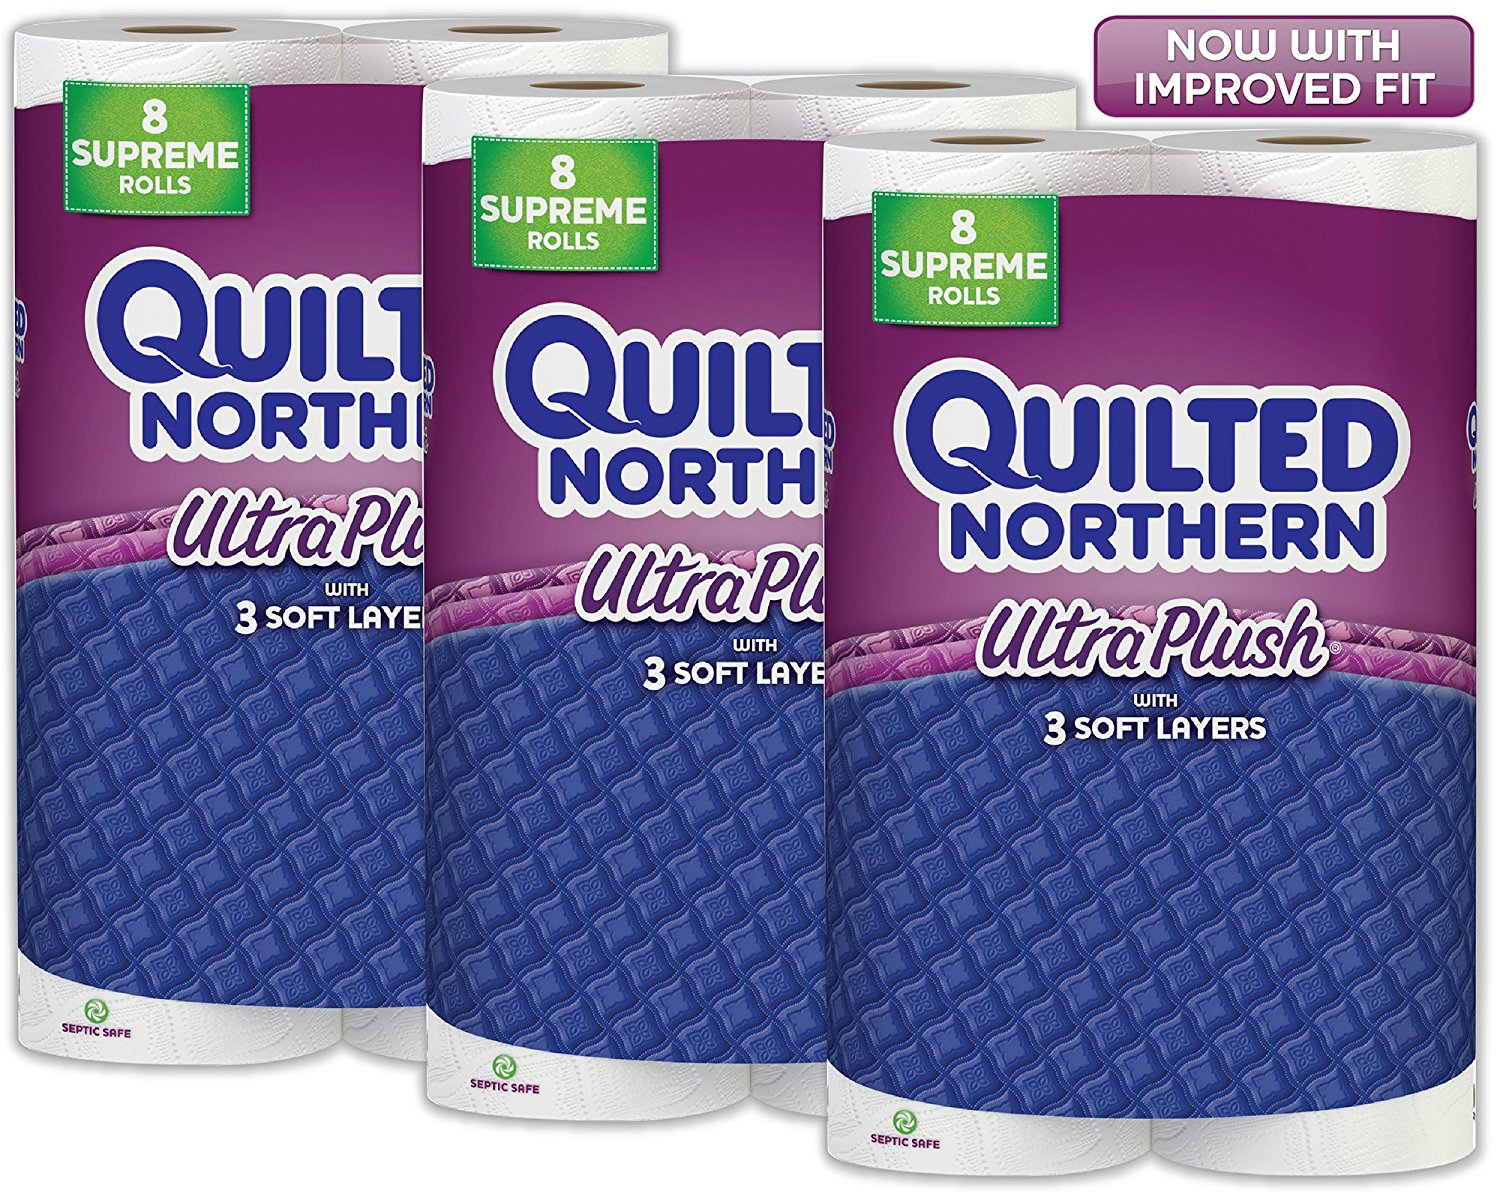 Quilted Norther Ultra Plush Only $.20 Per Regular Roll!